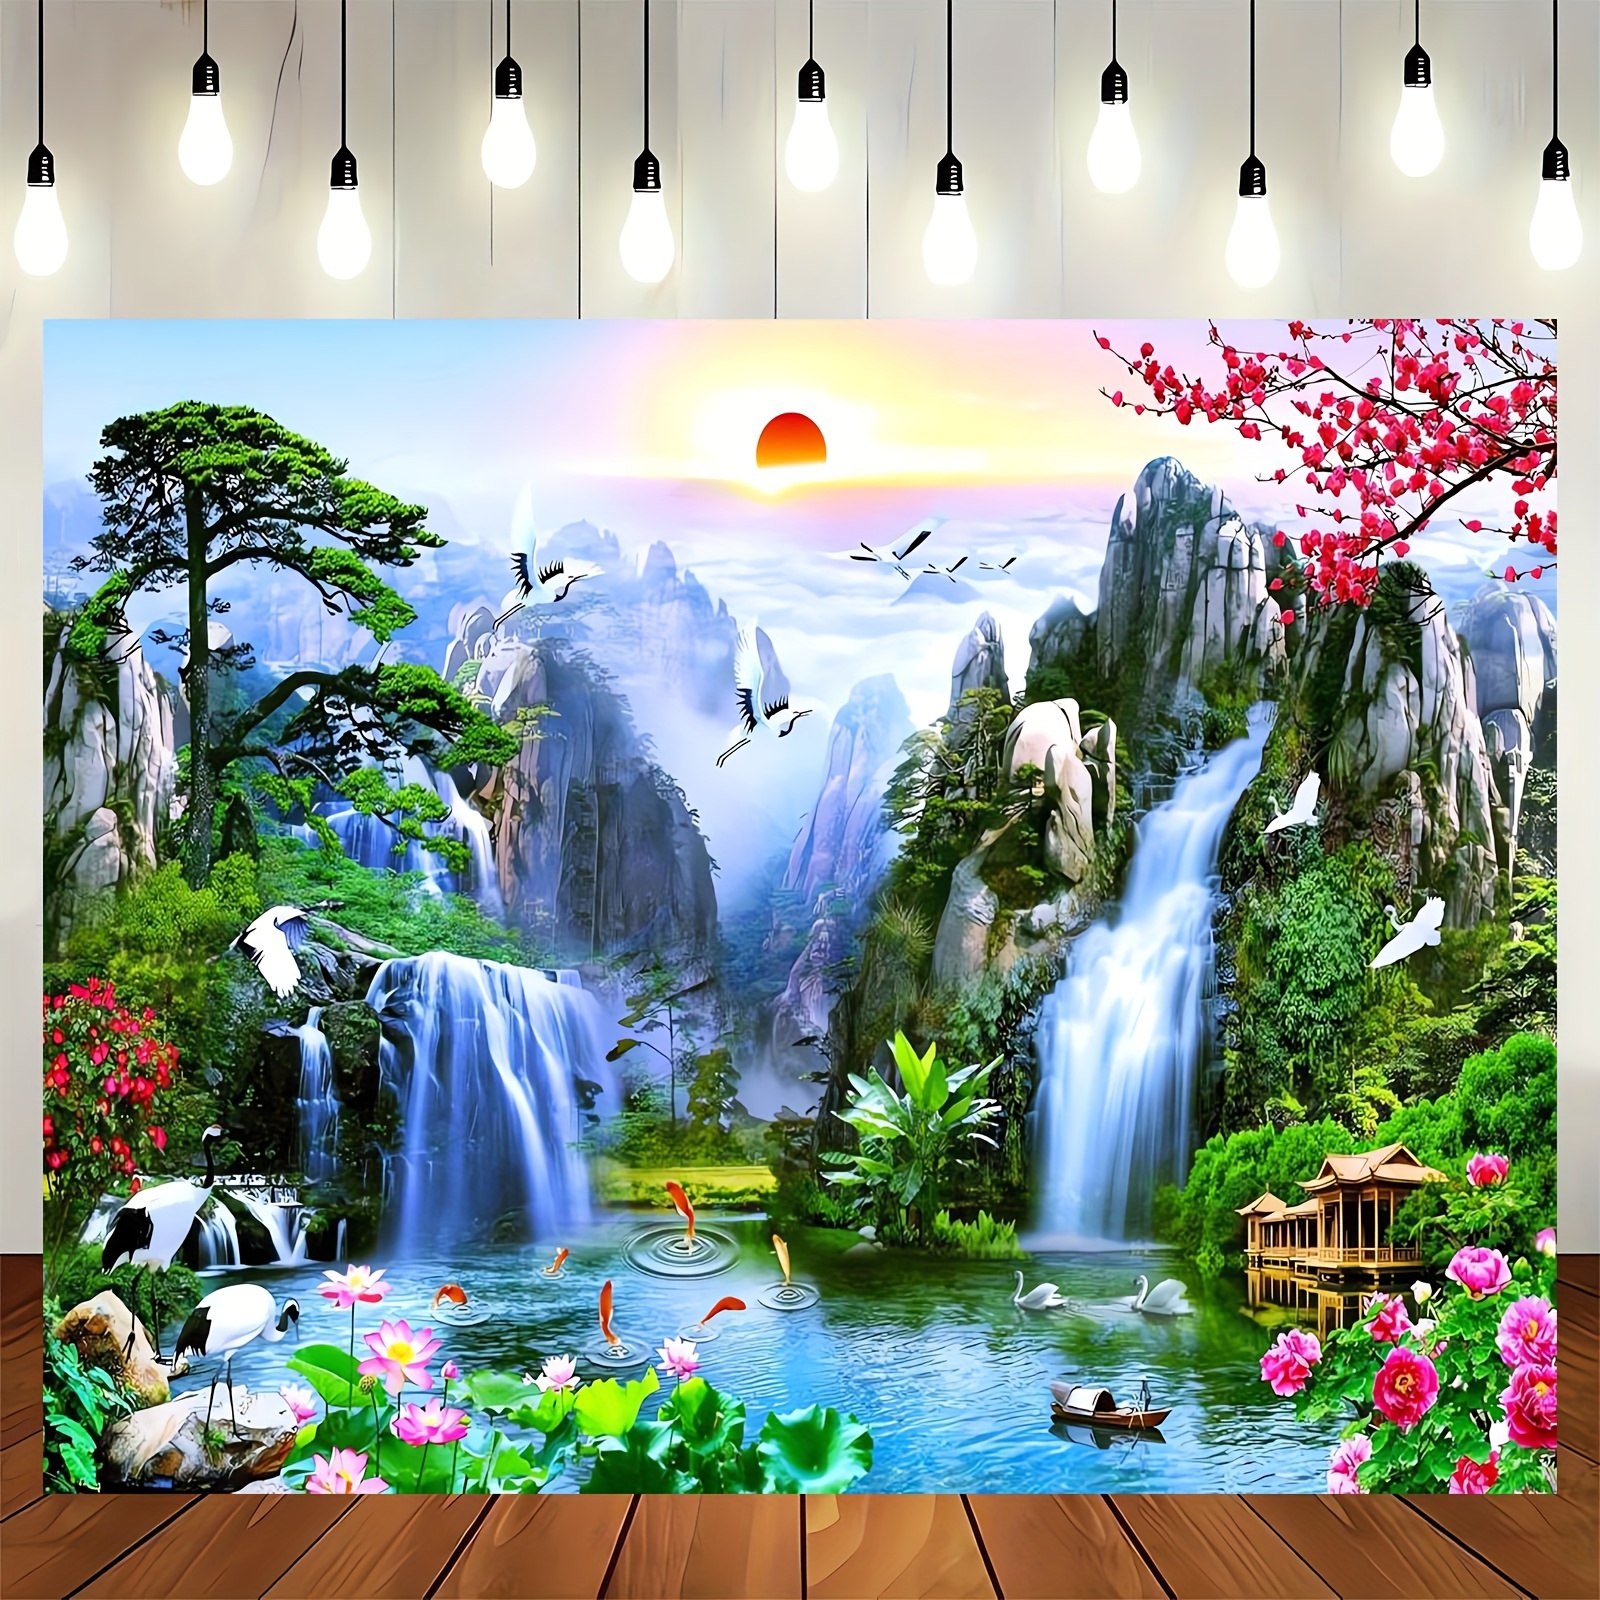 

1pc, 51×59inch/70.8×90.5inch, Fabric Fairyland Mountain Lake Photography Backdrop Waterfalls Fish Flowers Dreamy Natural Landscape Painting Background Wall Murals Home Decor Adults Portrait Photoshoot